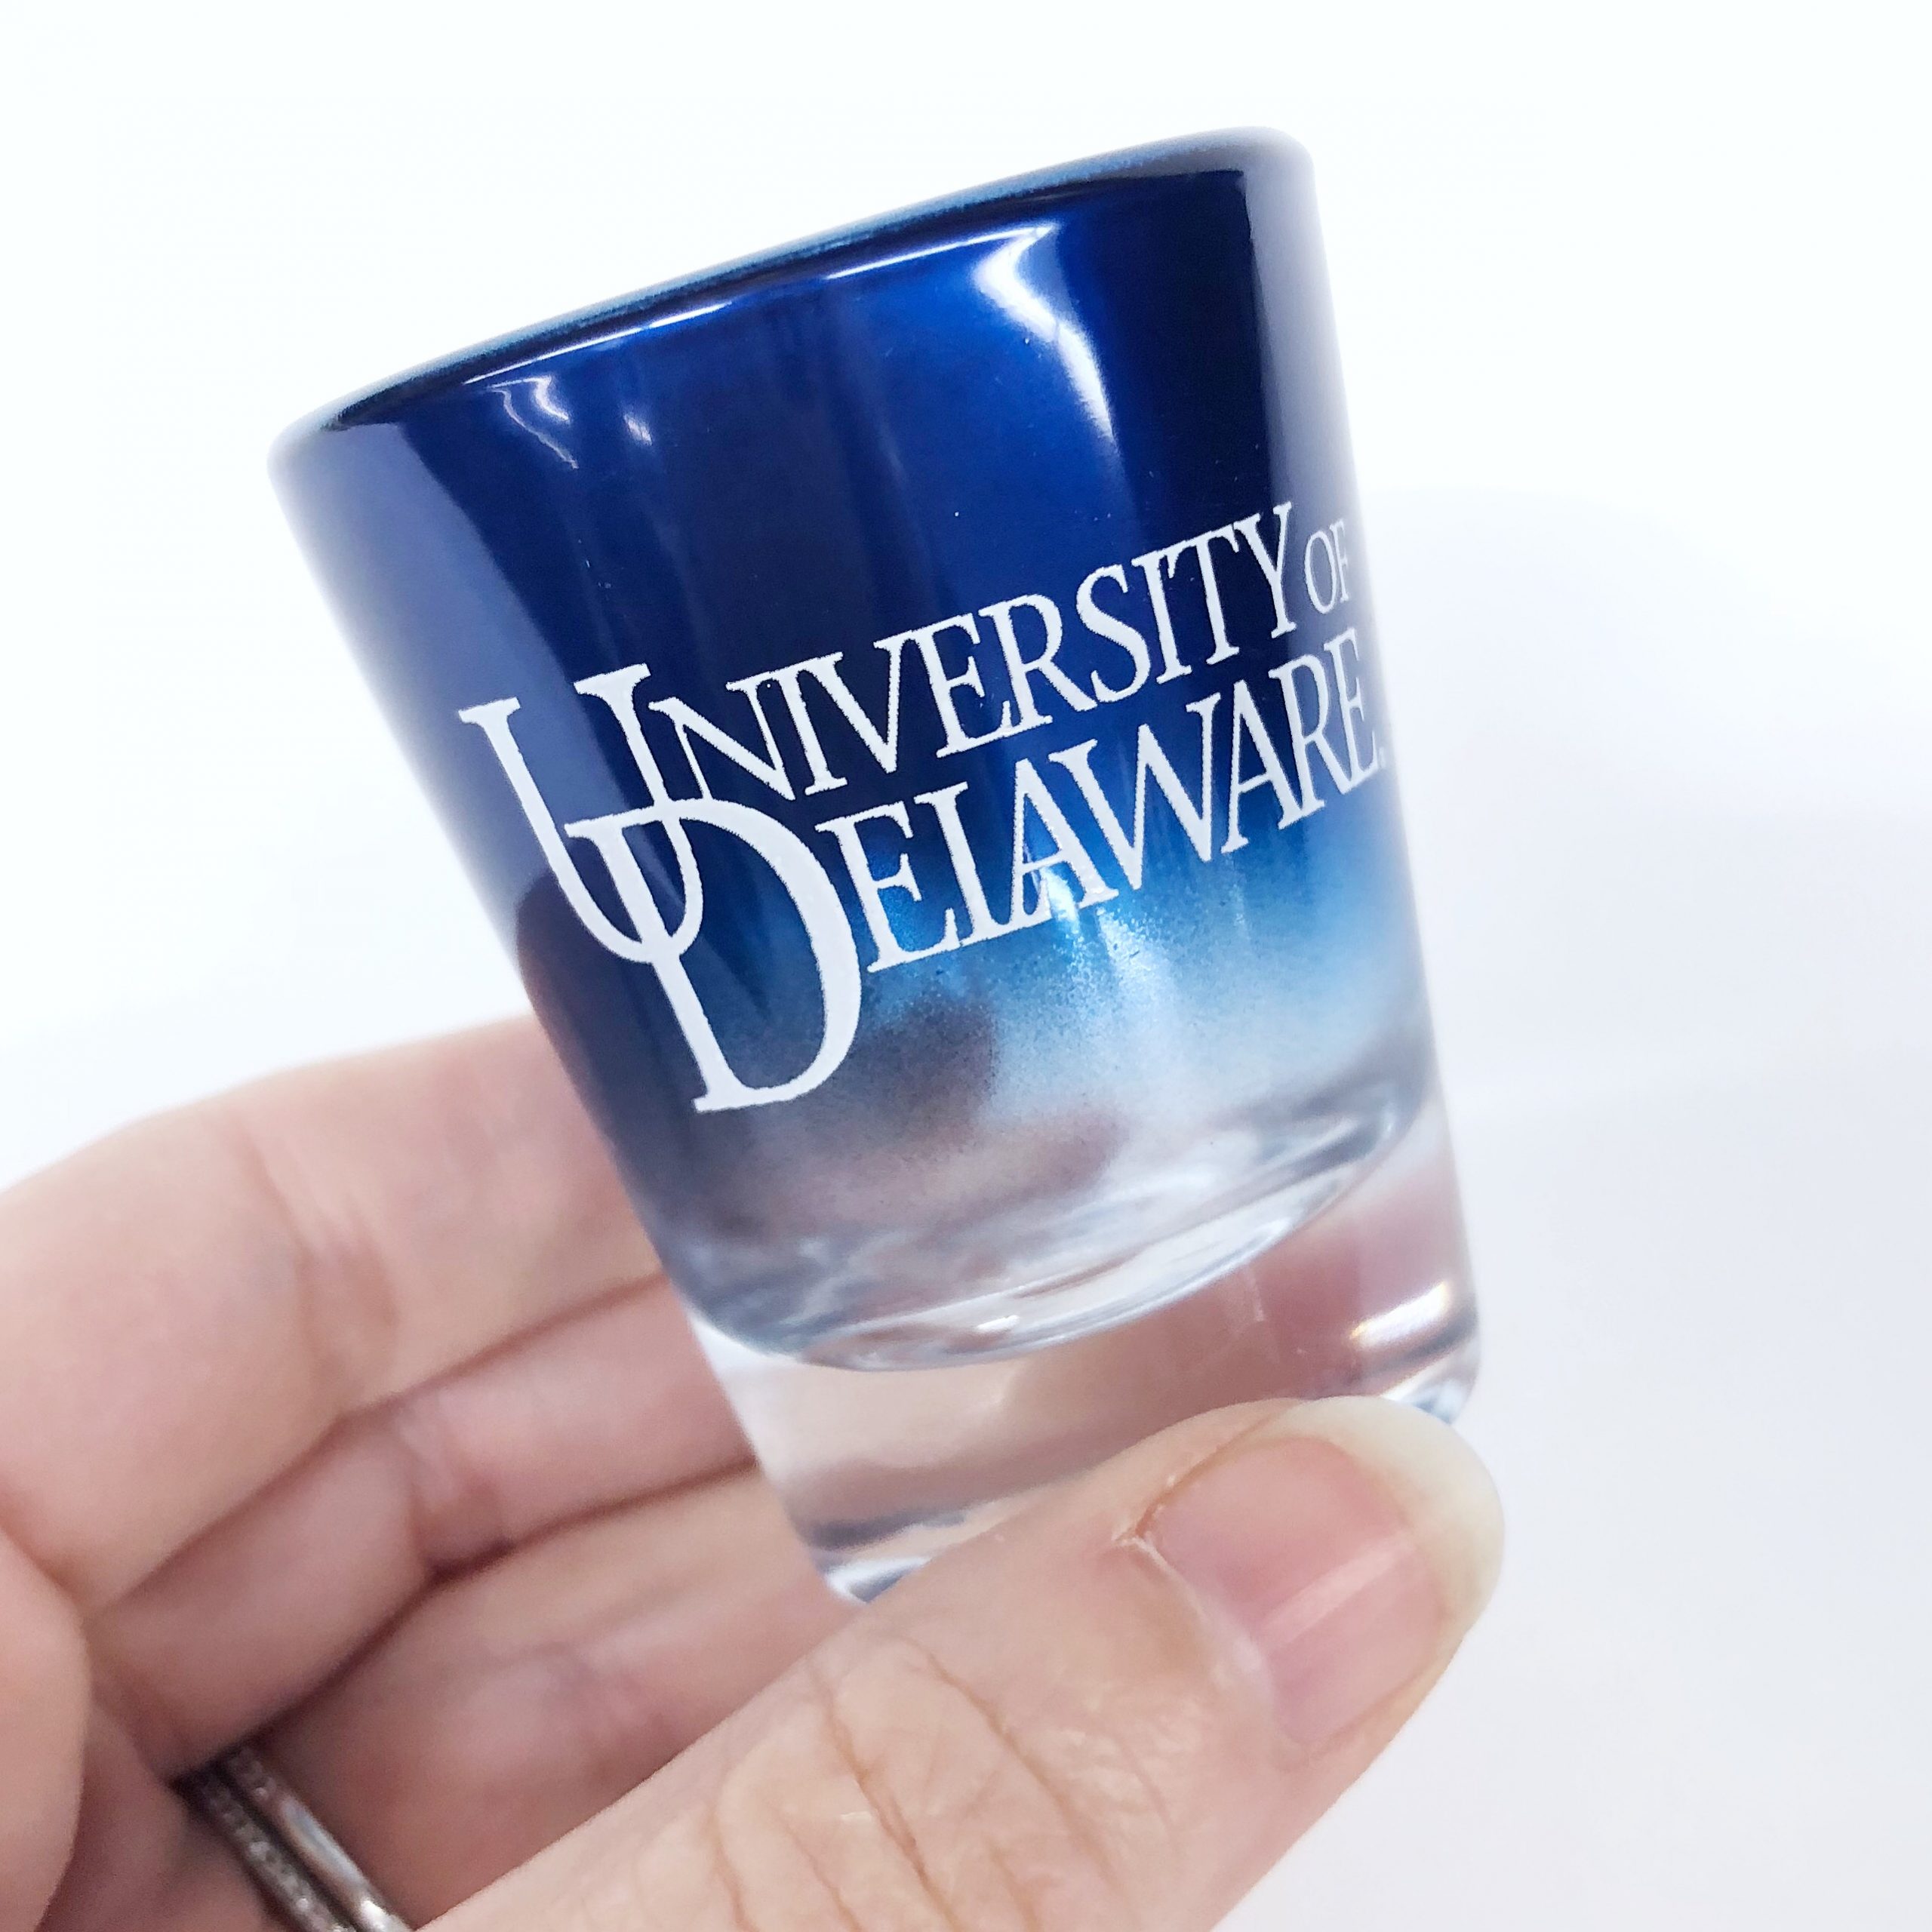 https://www.national5and10.com/wp-content/uploads/2018/03/University-of-Delaware-Blue-Mirrored-Shot-Glass-1-scaled.jpg